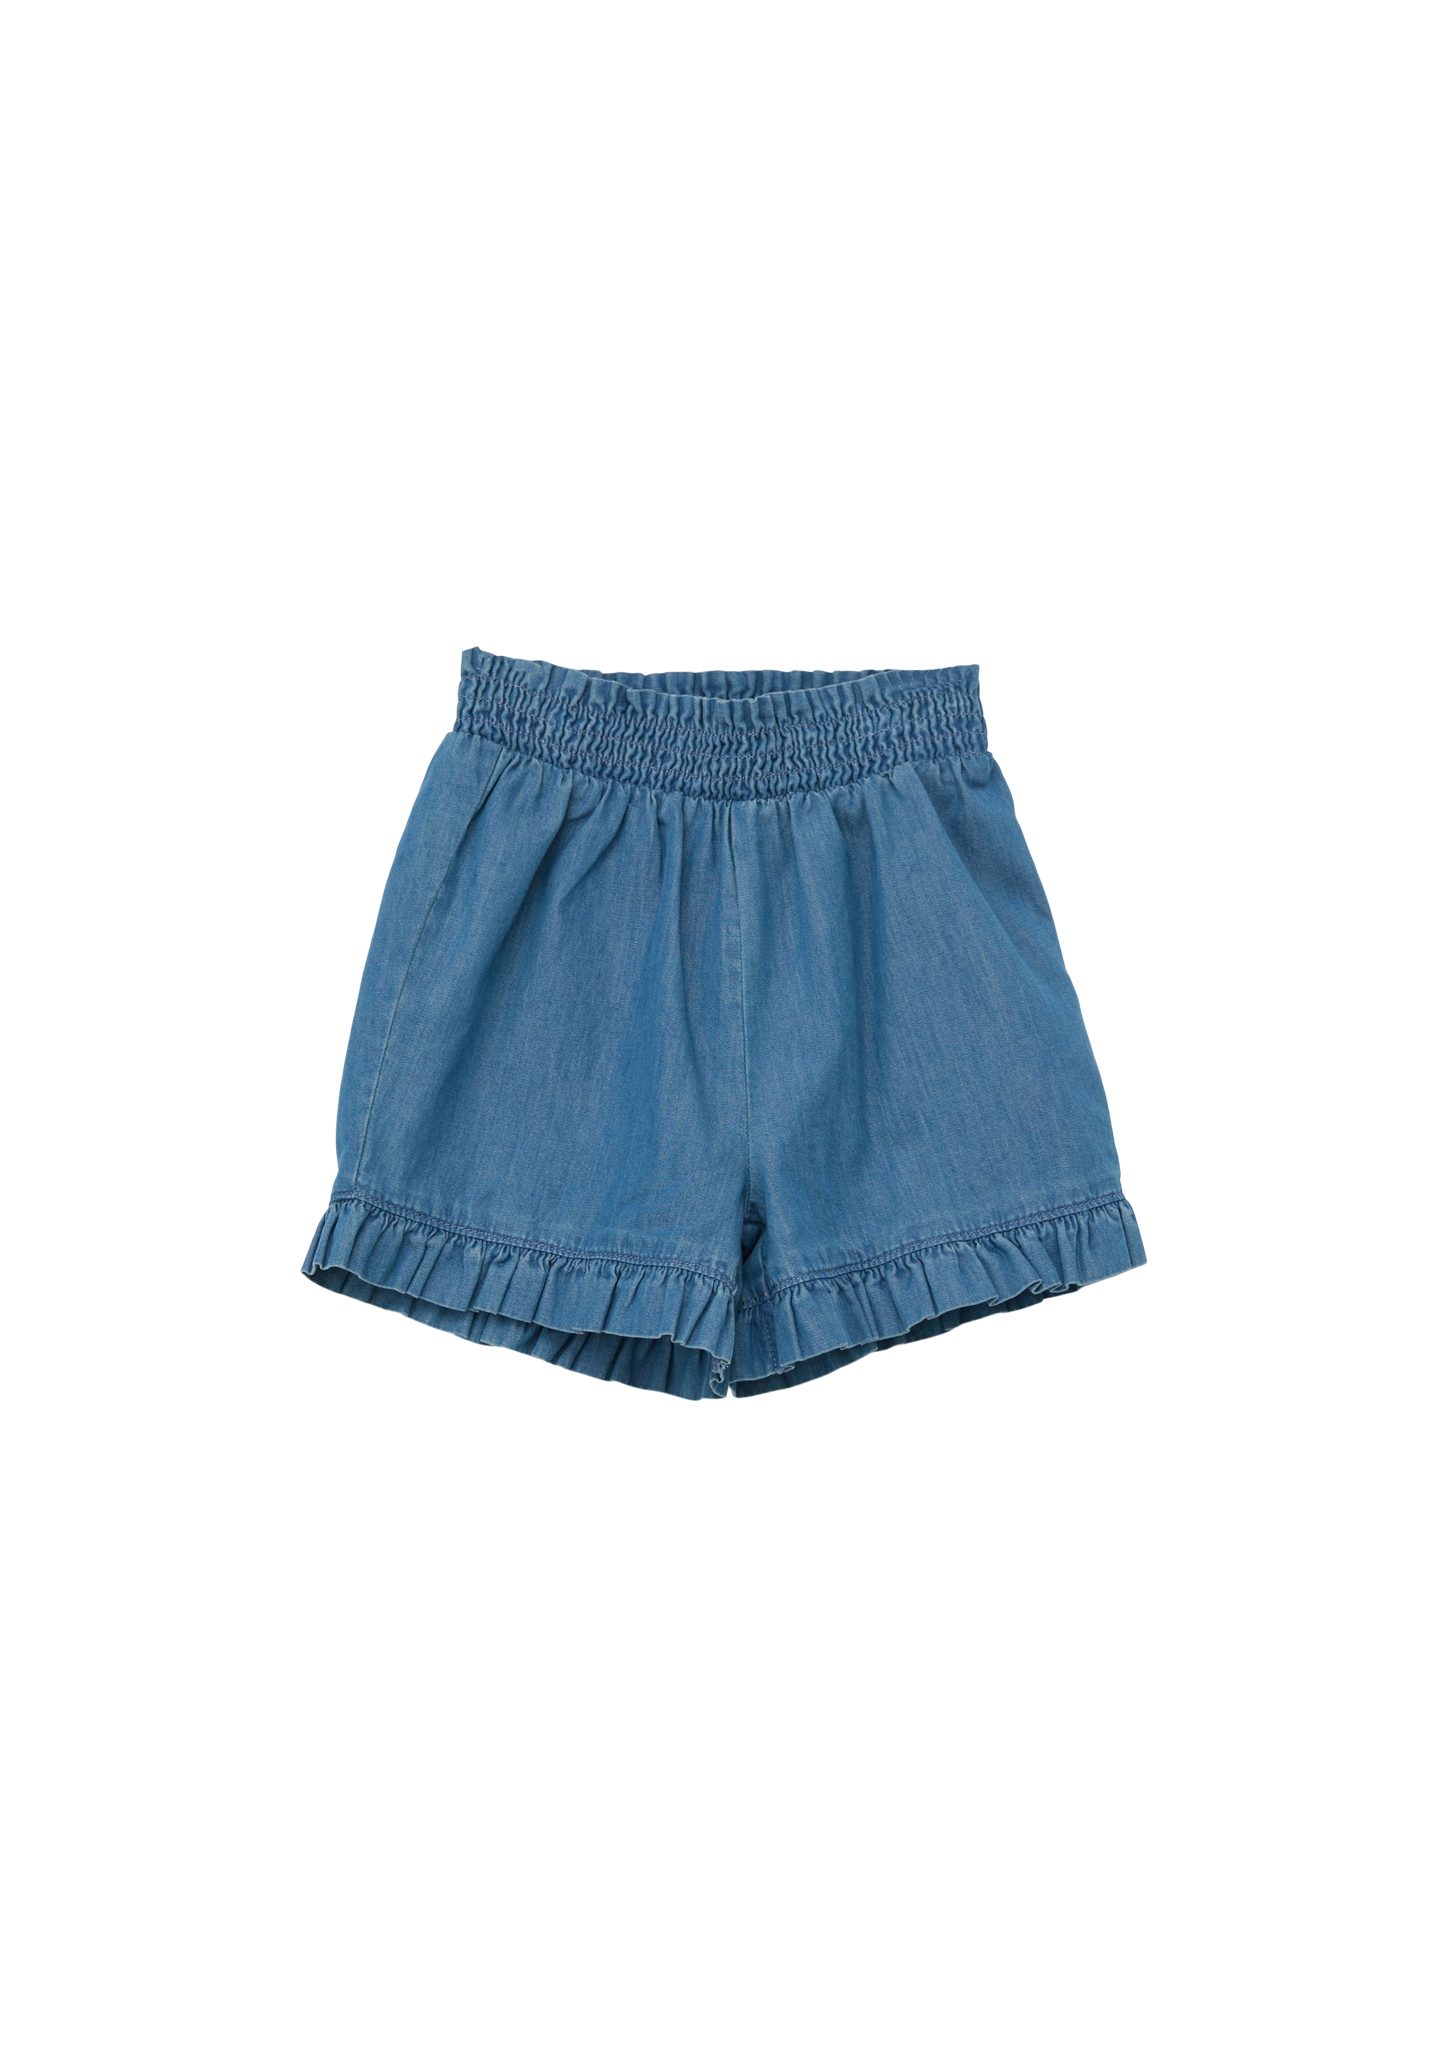 Jeansshorts Jeans-Shorts Smok-Detail Rüschen, Wide Leg Loose Fit Mid / / Rise / s.Oliver